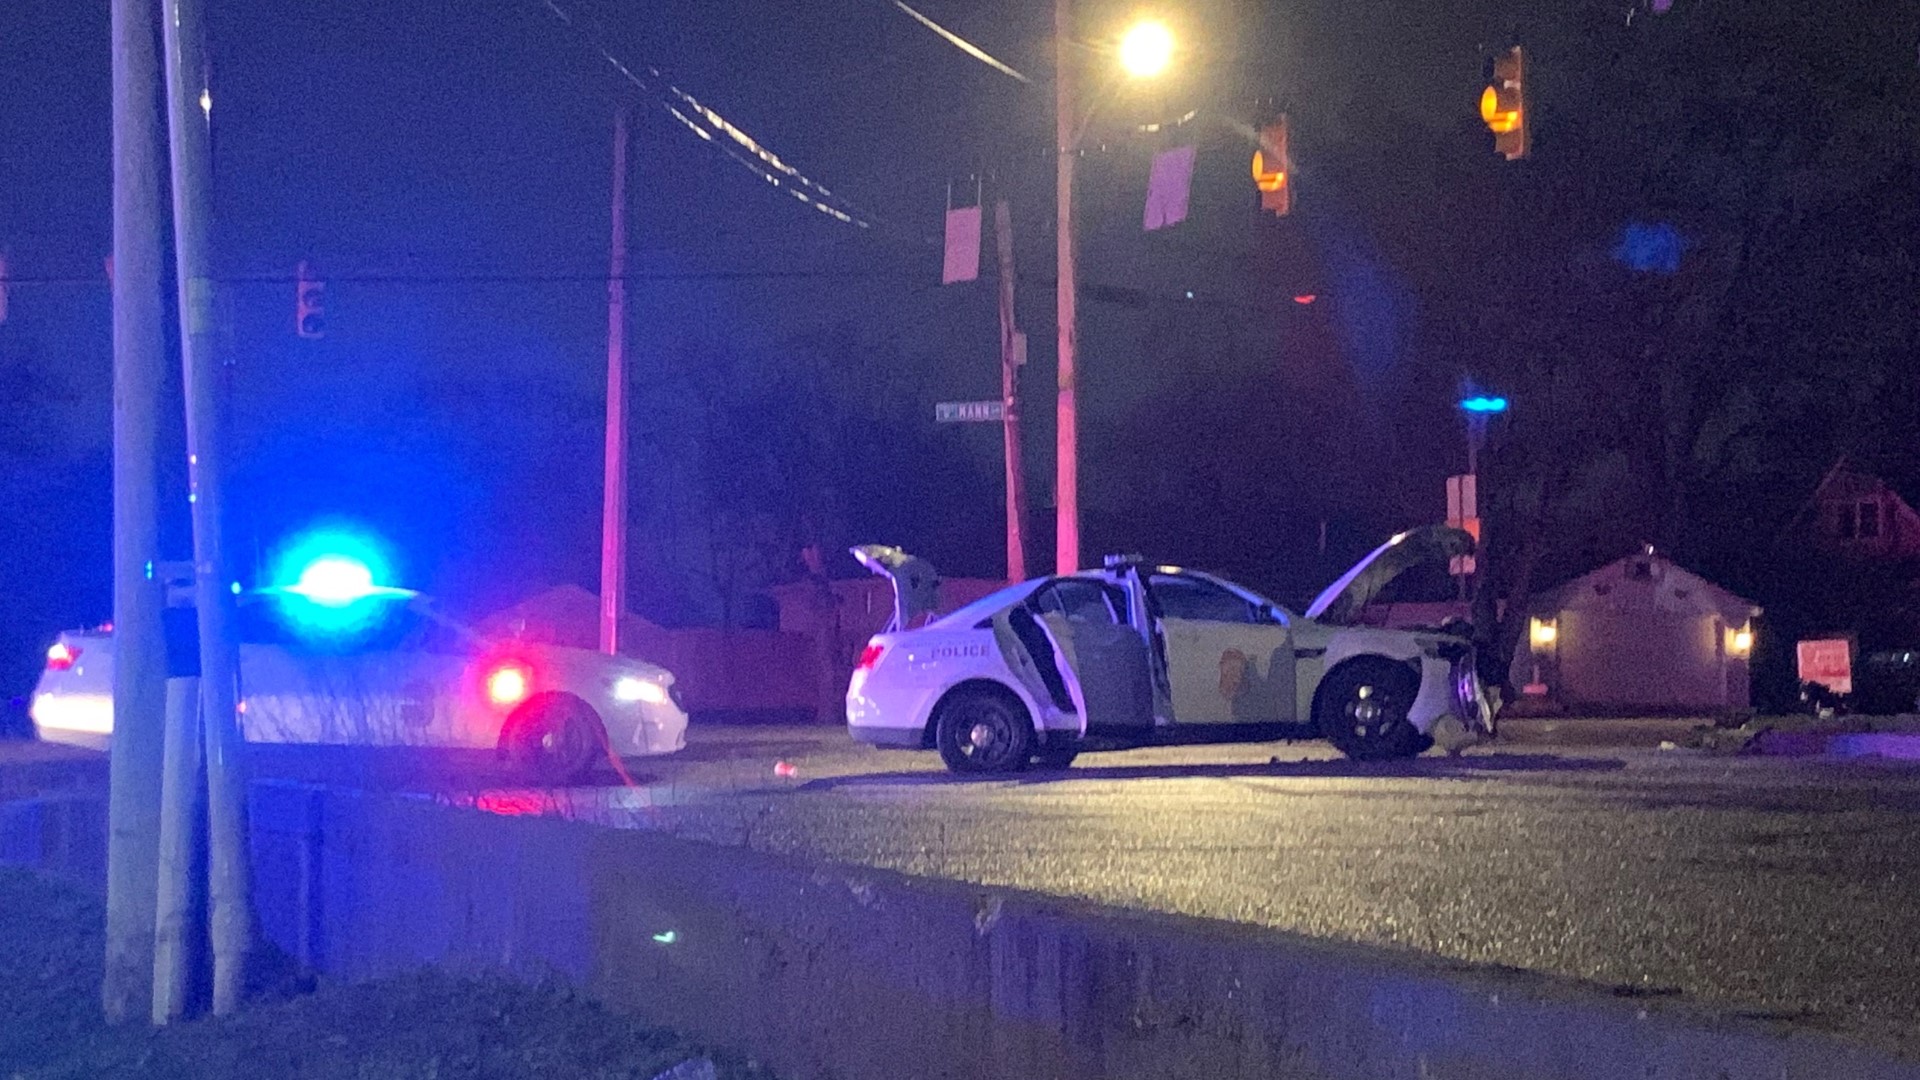 The crash occurred at the intersection of Mann Road and West Mooresville Road, just south of Kentucky Avenue, around 5 a.m. Thursday.